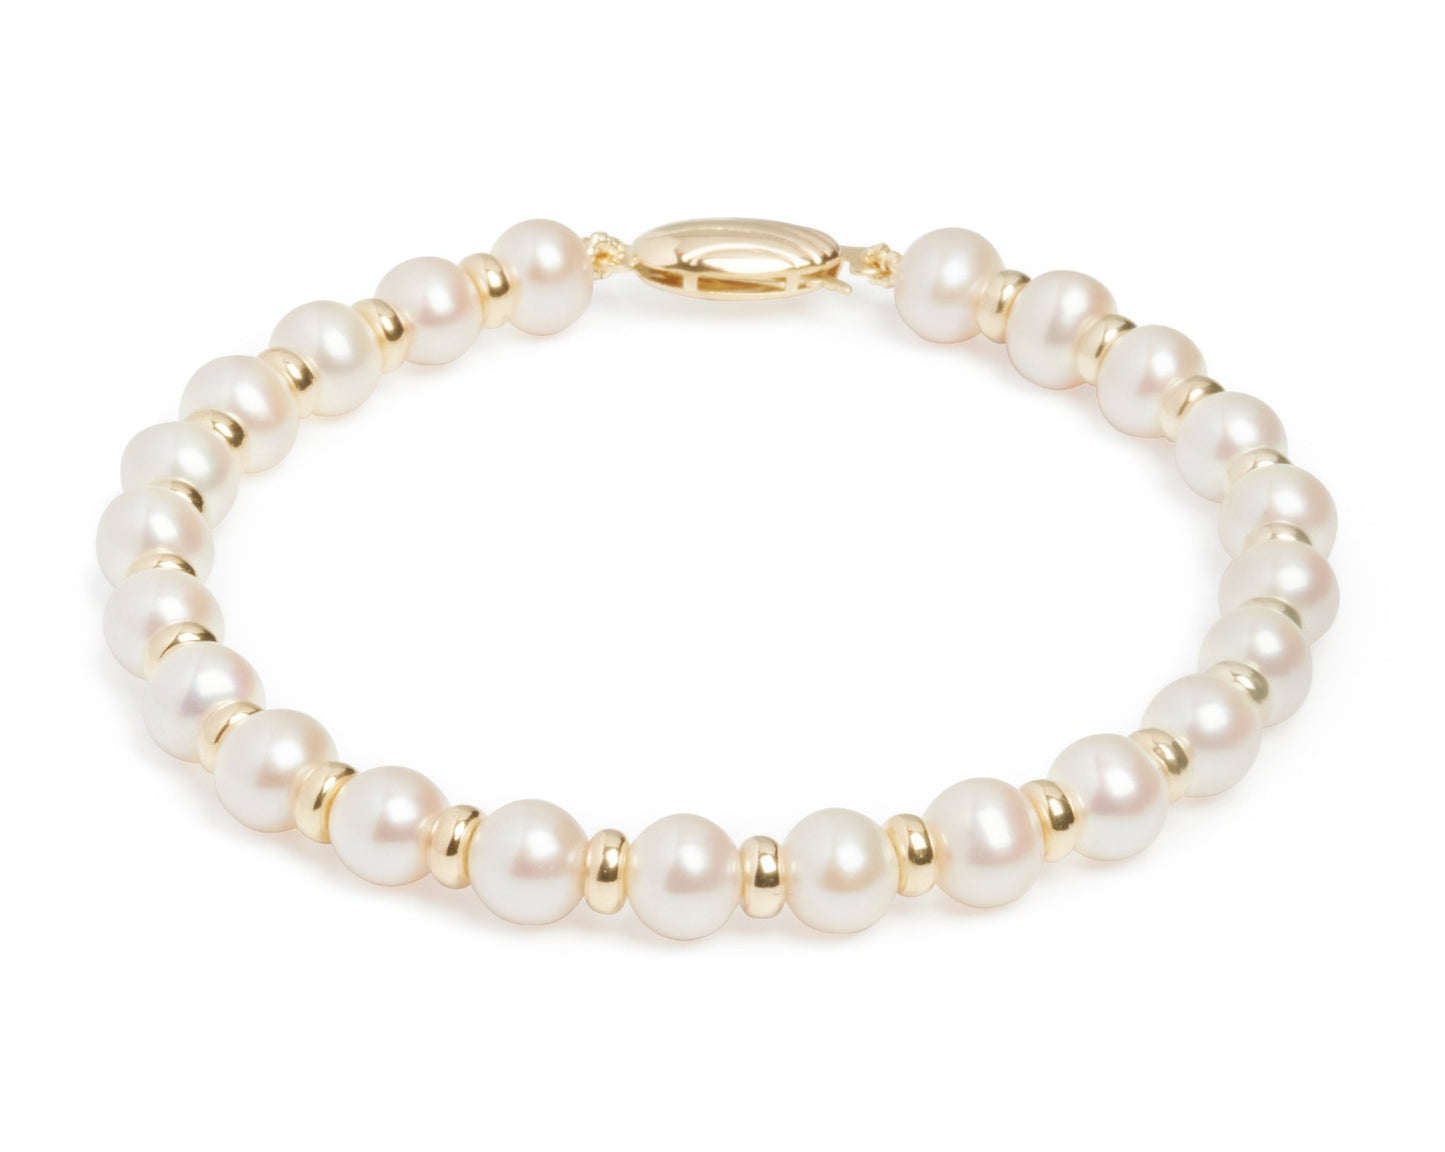 9ct Yellow Gold Alternating Cultured Pearl & Gold Bead Bracelet